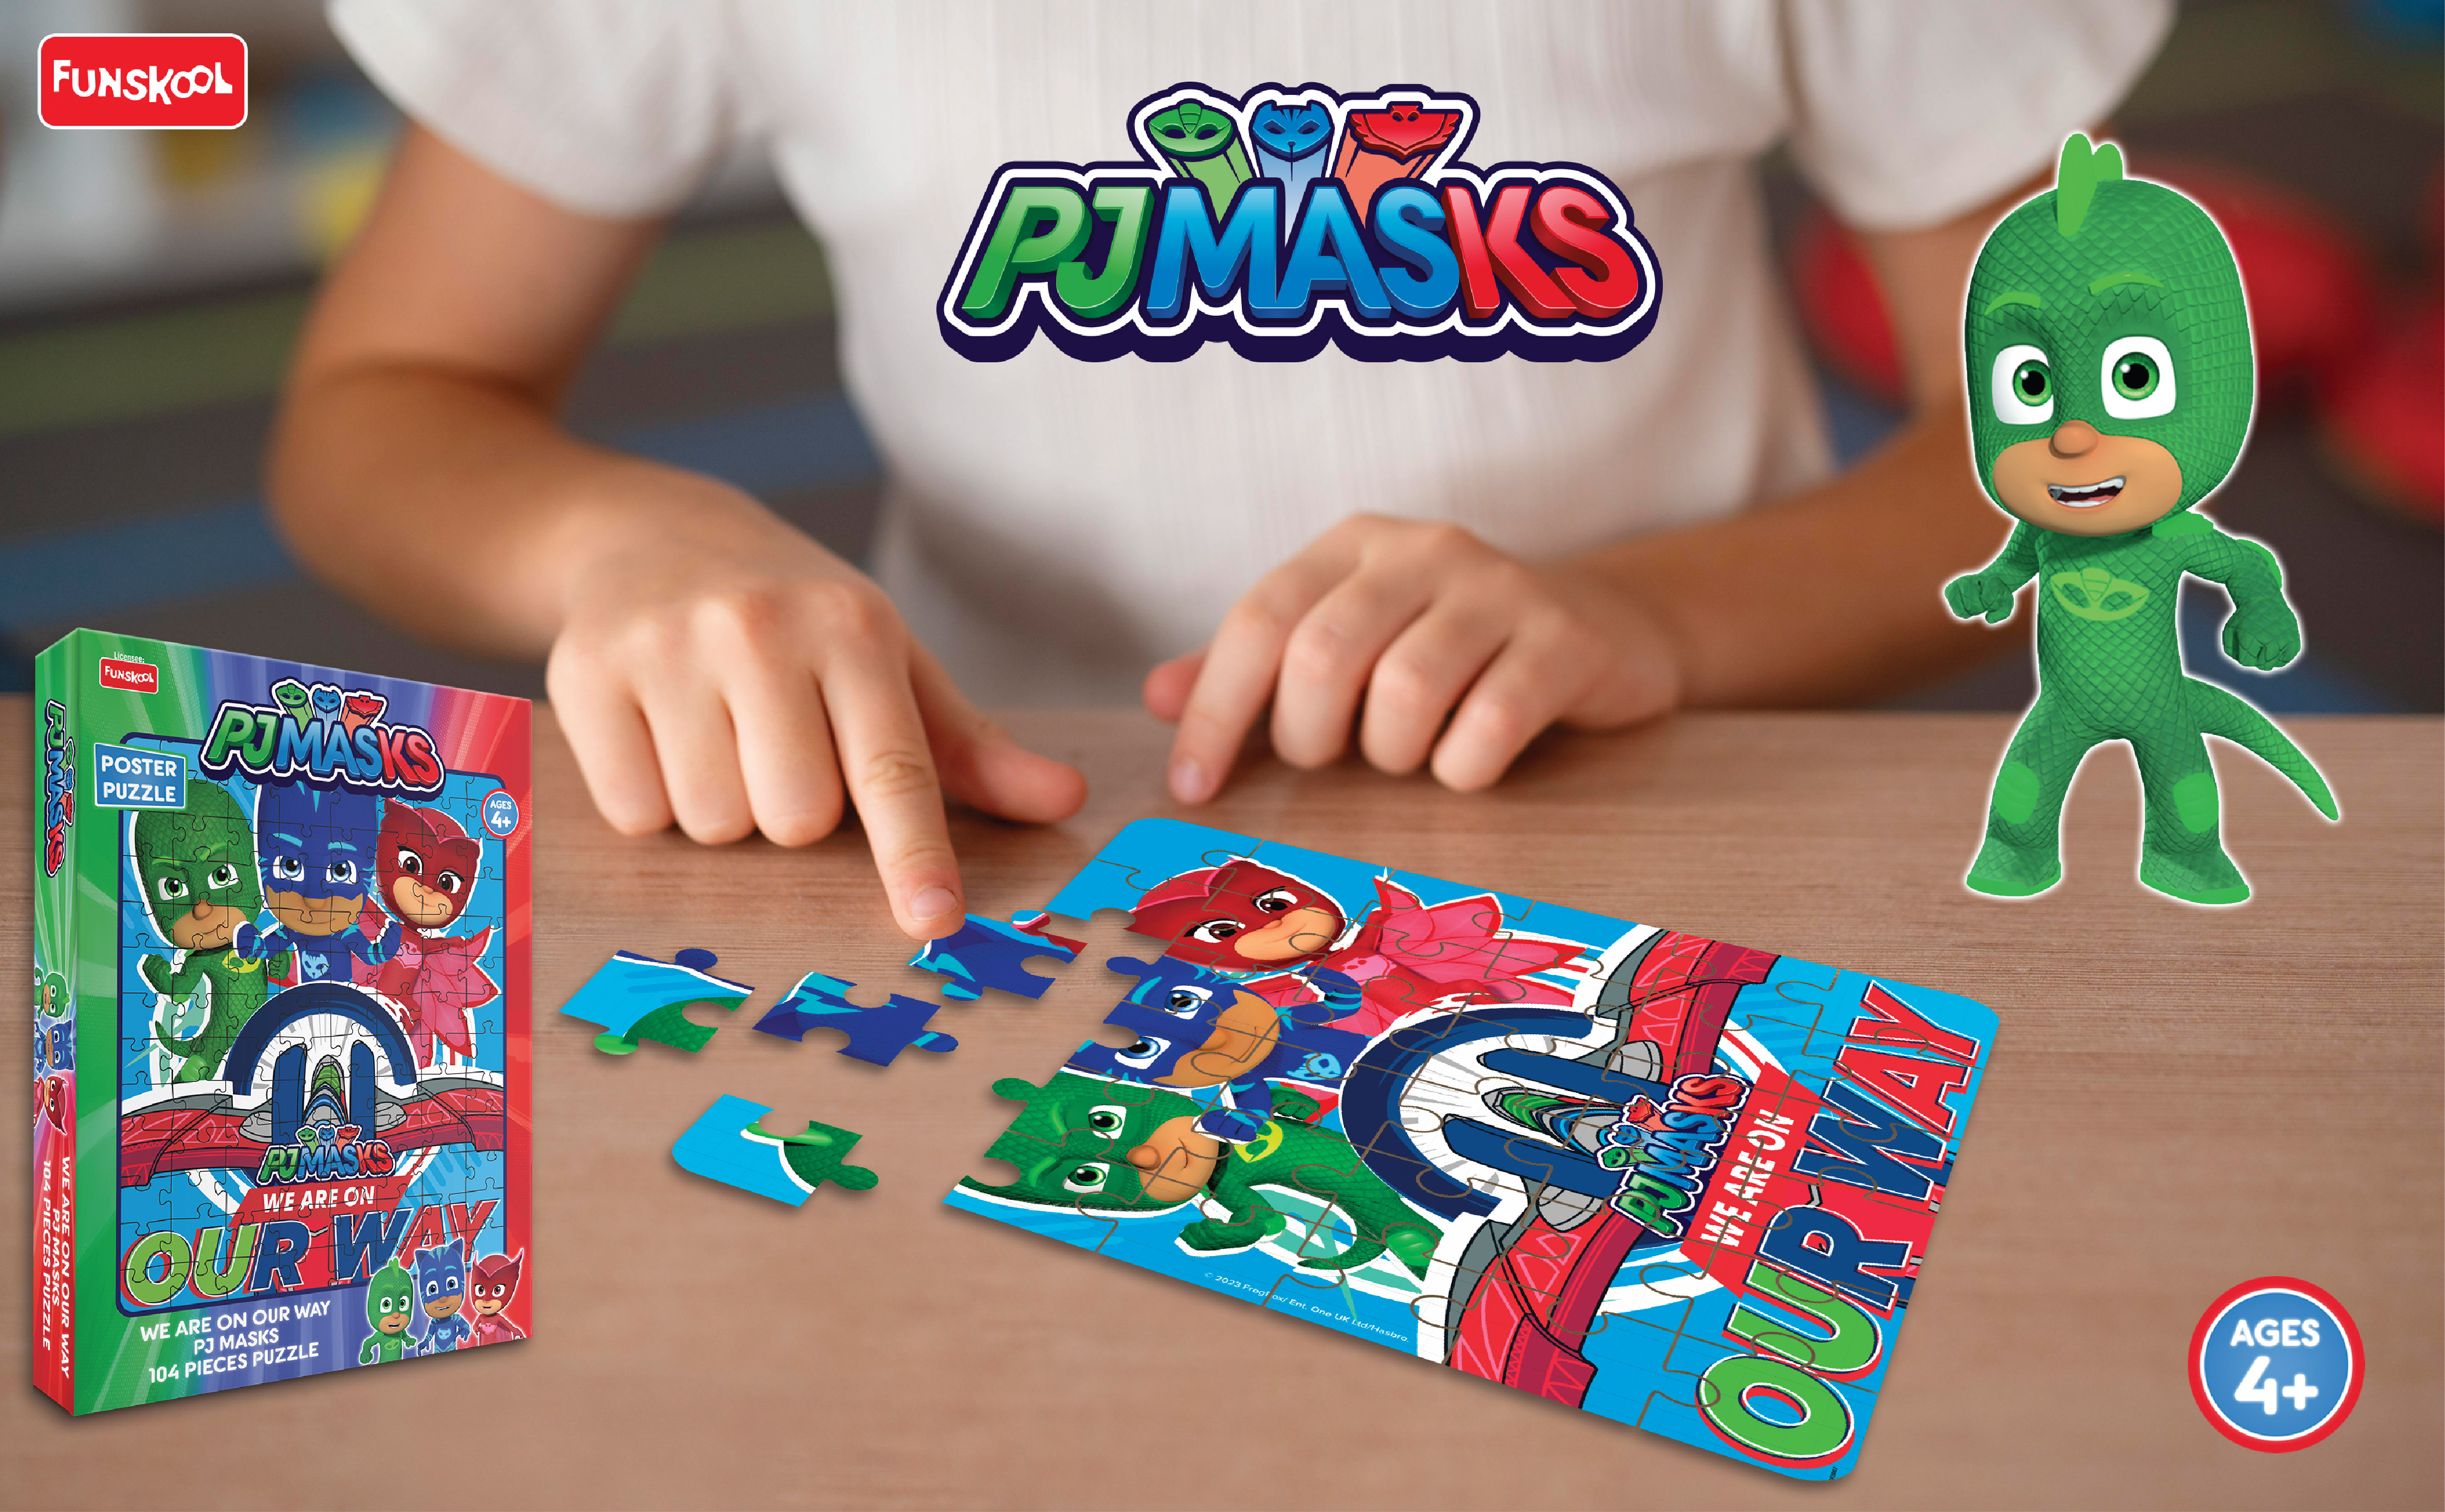 PJ MASKS - WE ARE ON OUR WAY 104 PCS PUZZLE